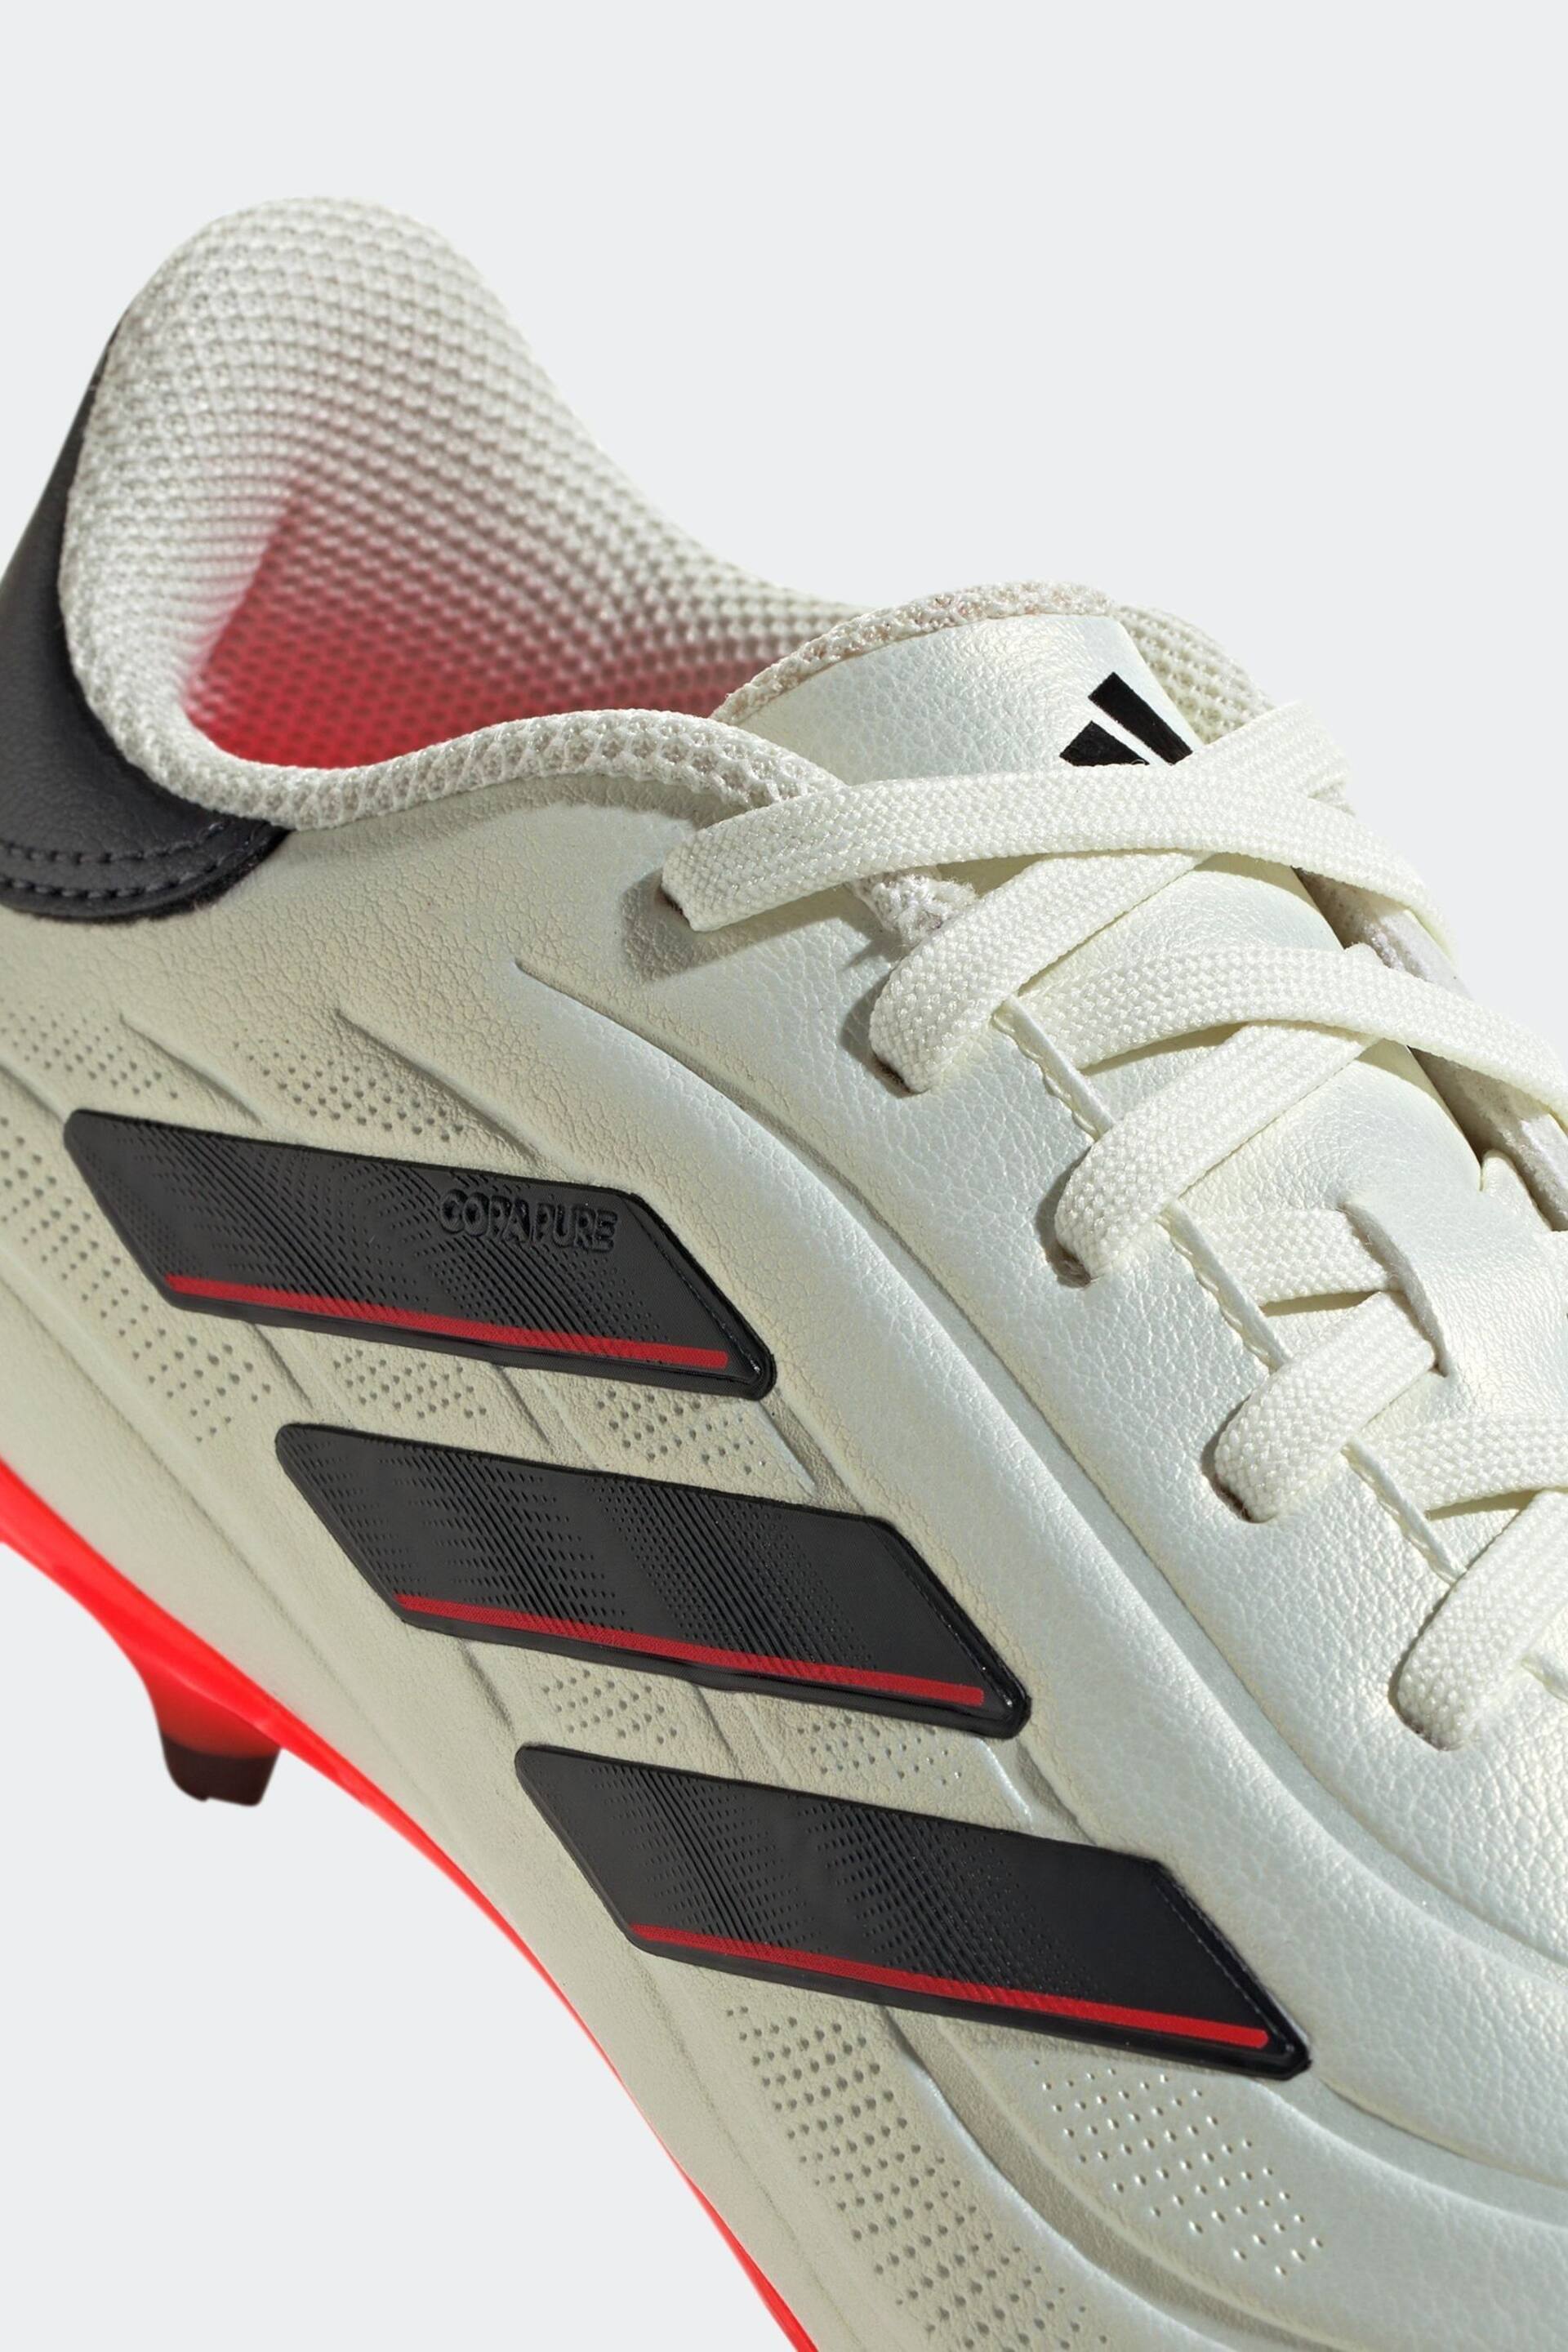 adidas Silver Football Copa Pure II League Firm Ground Kids Boots - Image 9 of 10